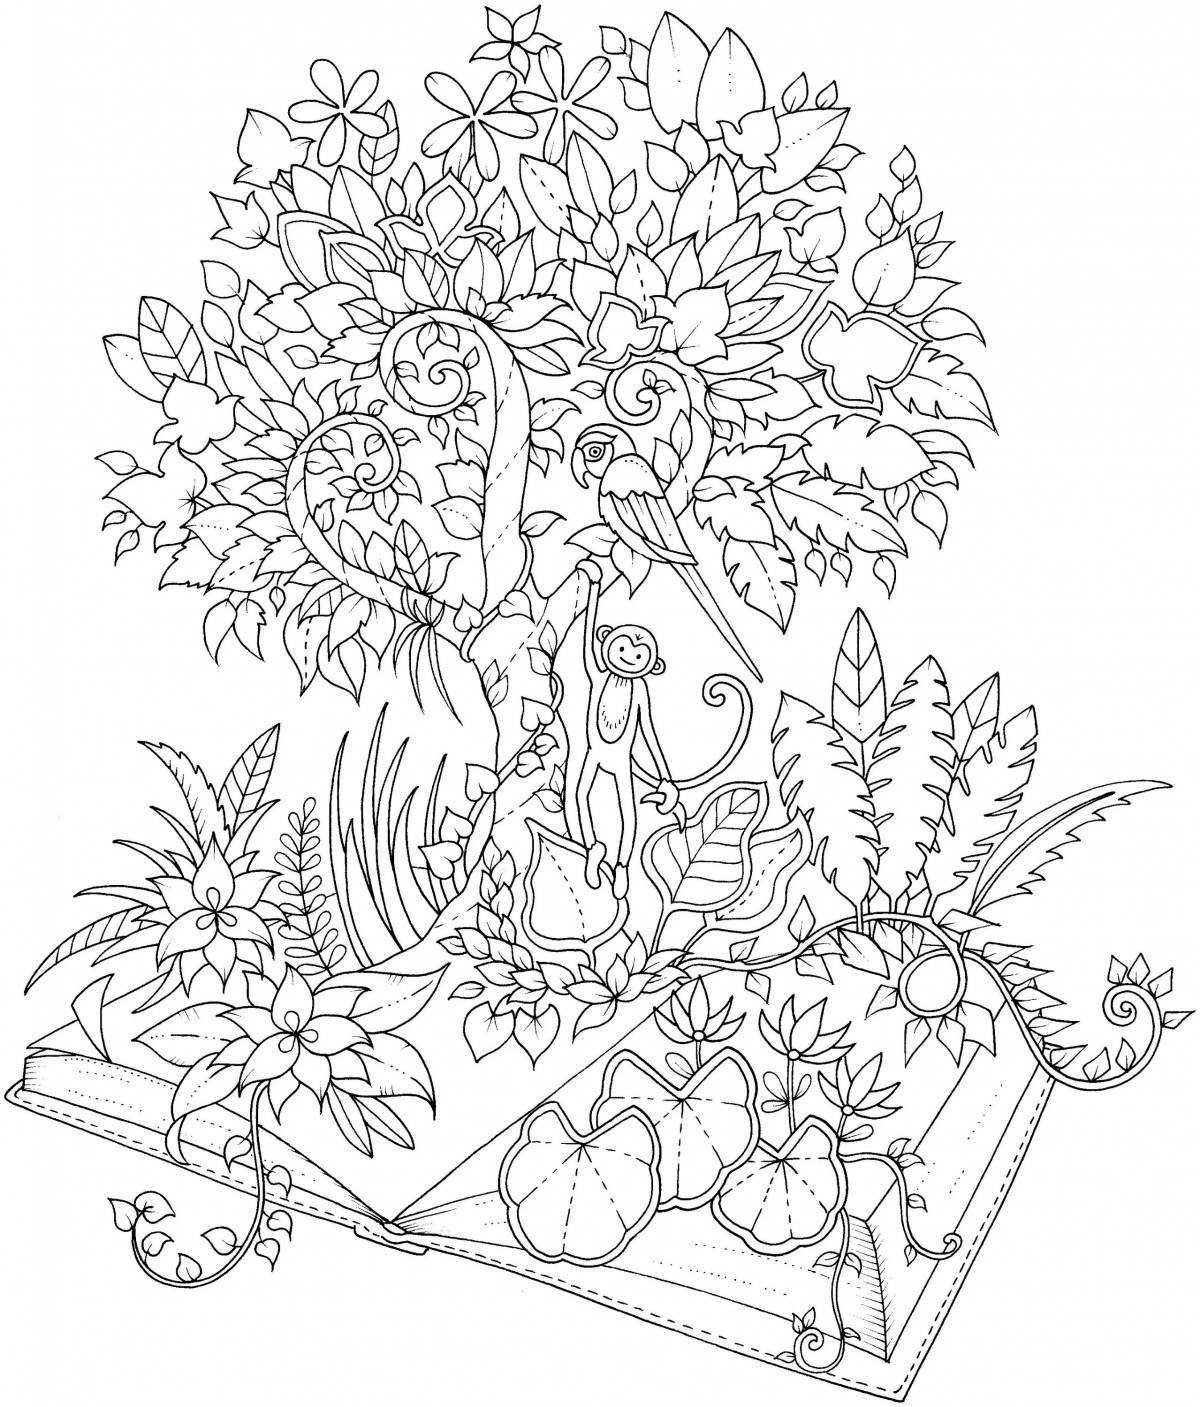 Amazing jungle coloring pages - wild